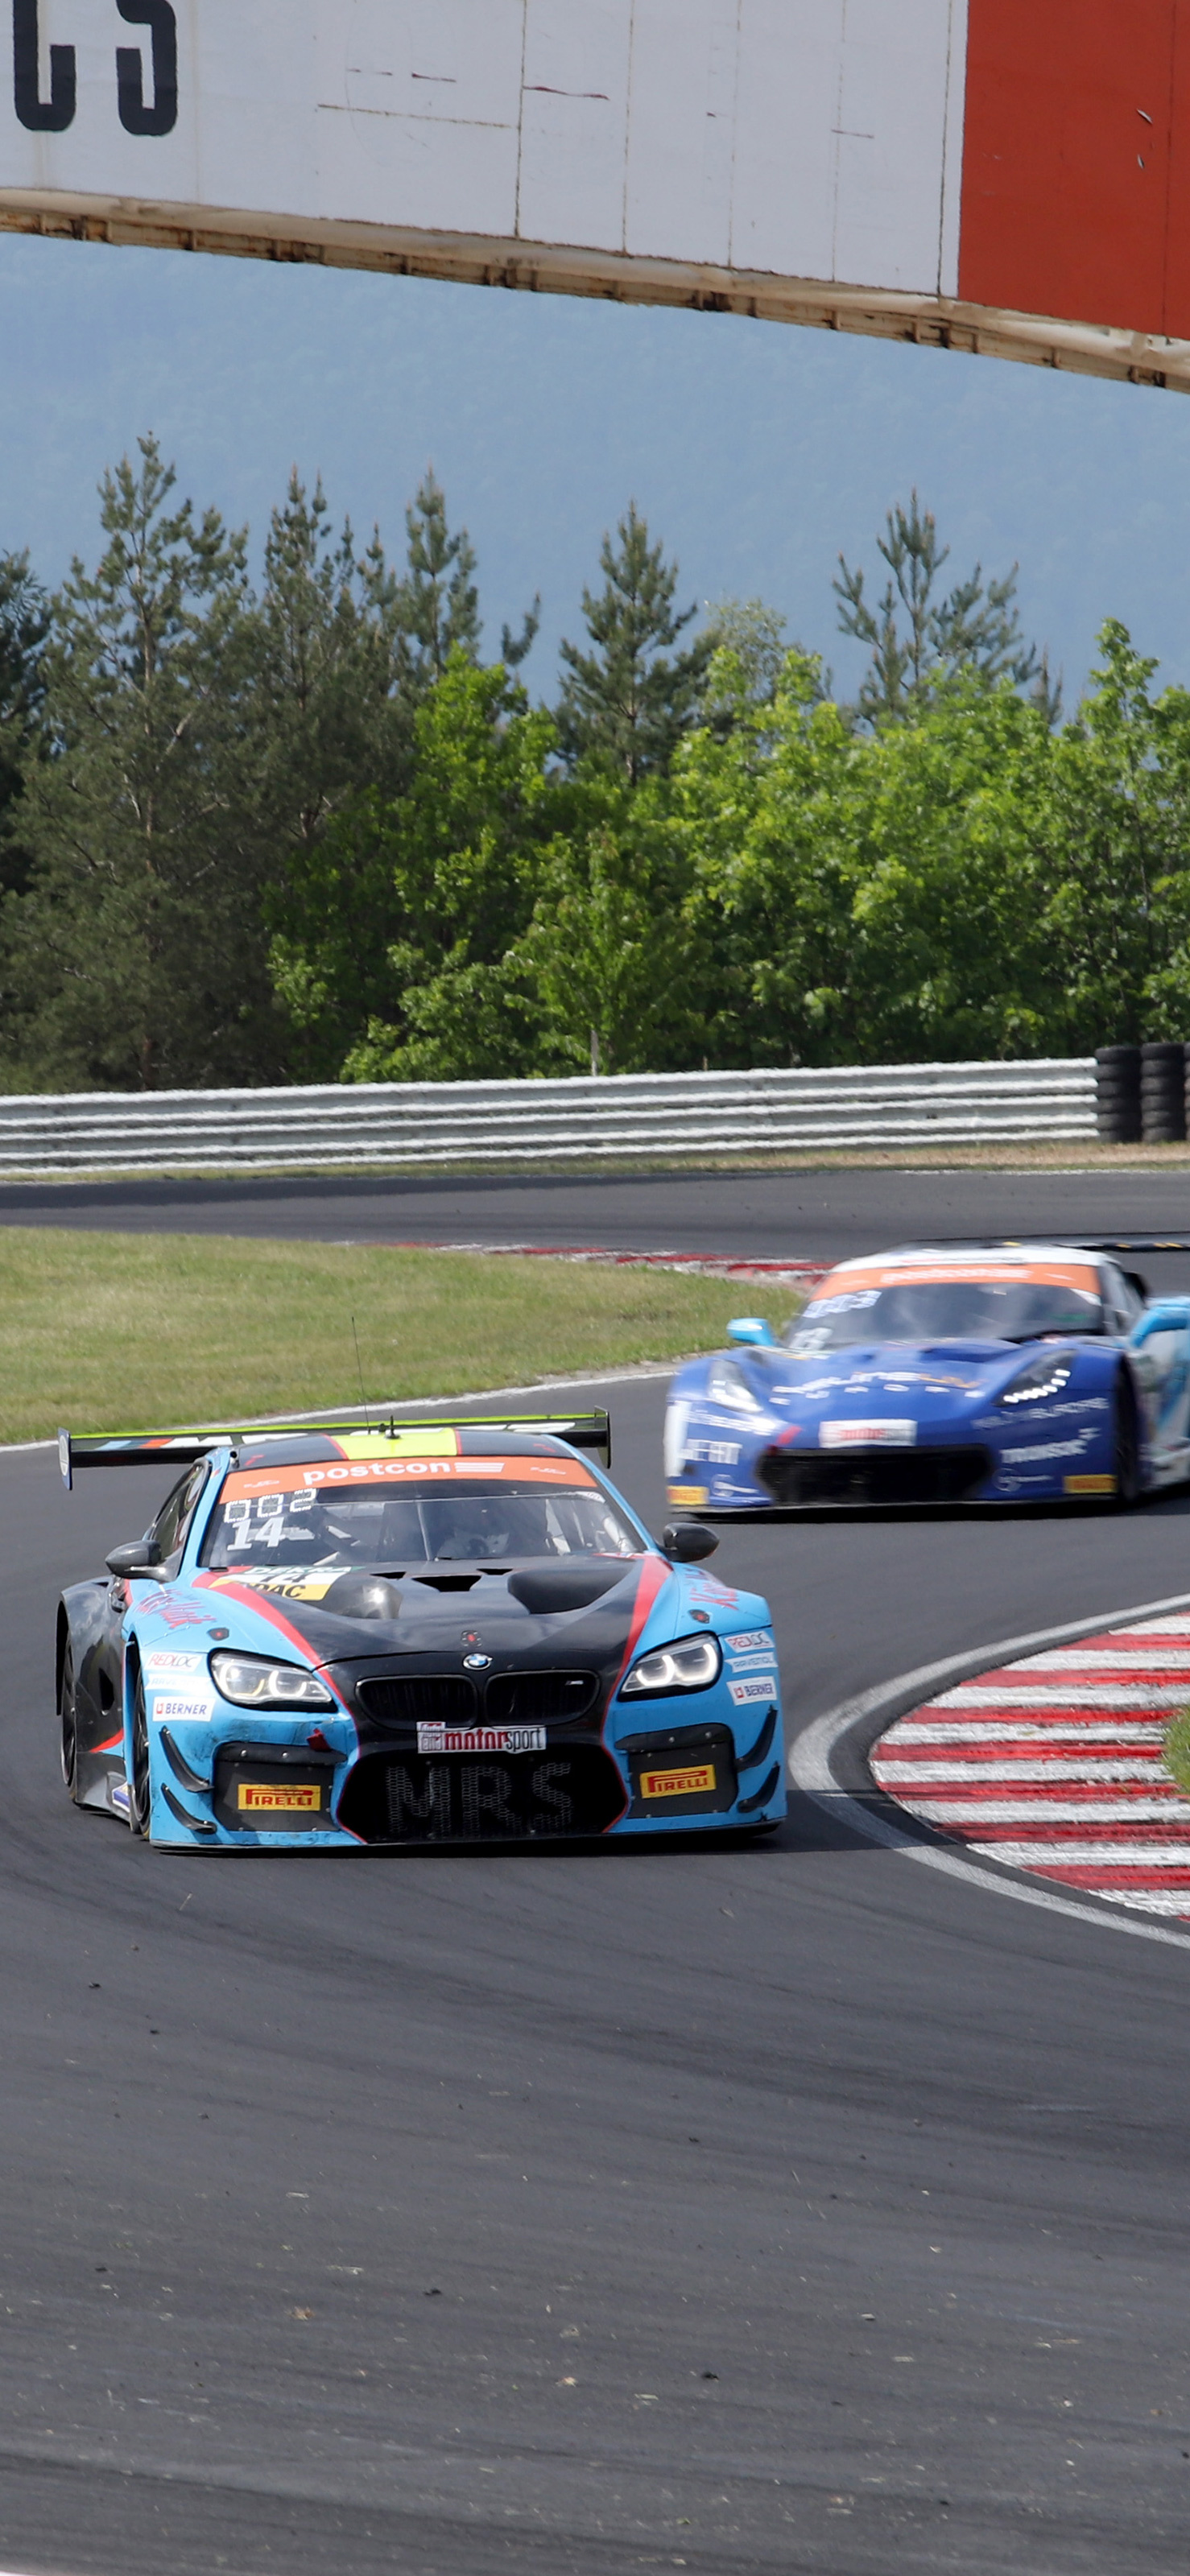 Auto Racing: Mixed-class races, Grand touring, International and national series. 1480x3200 HD Wallpaper.